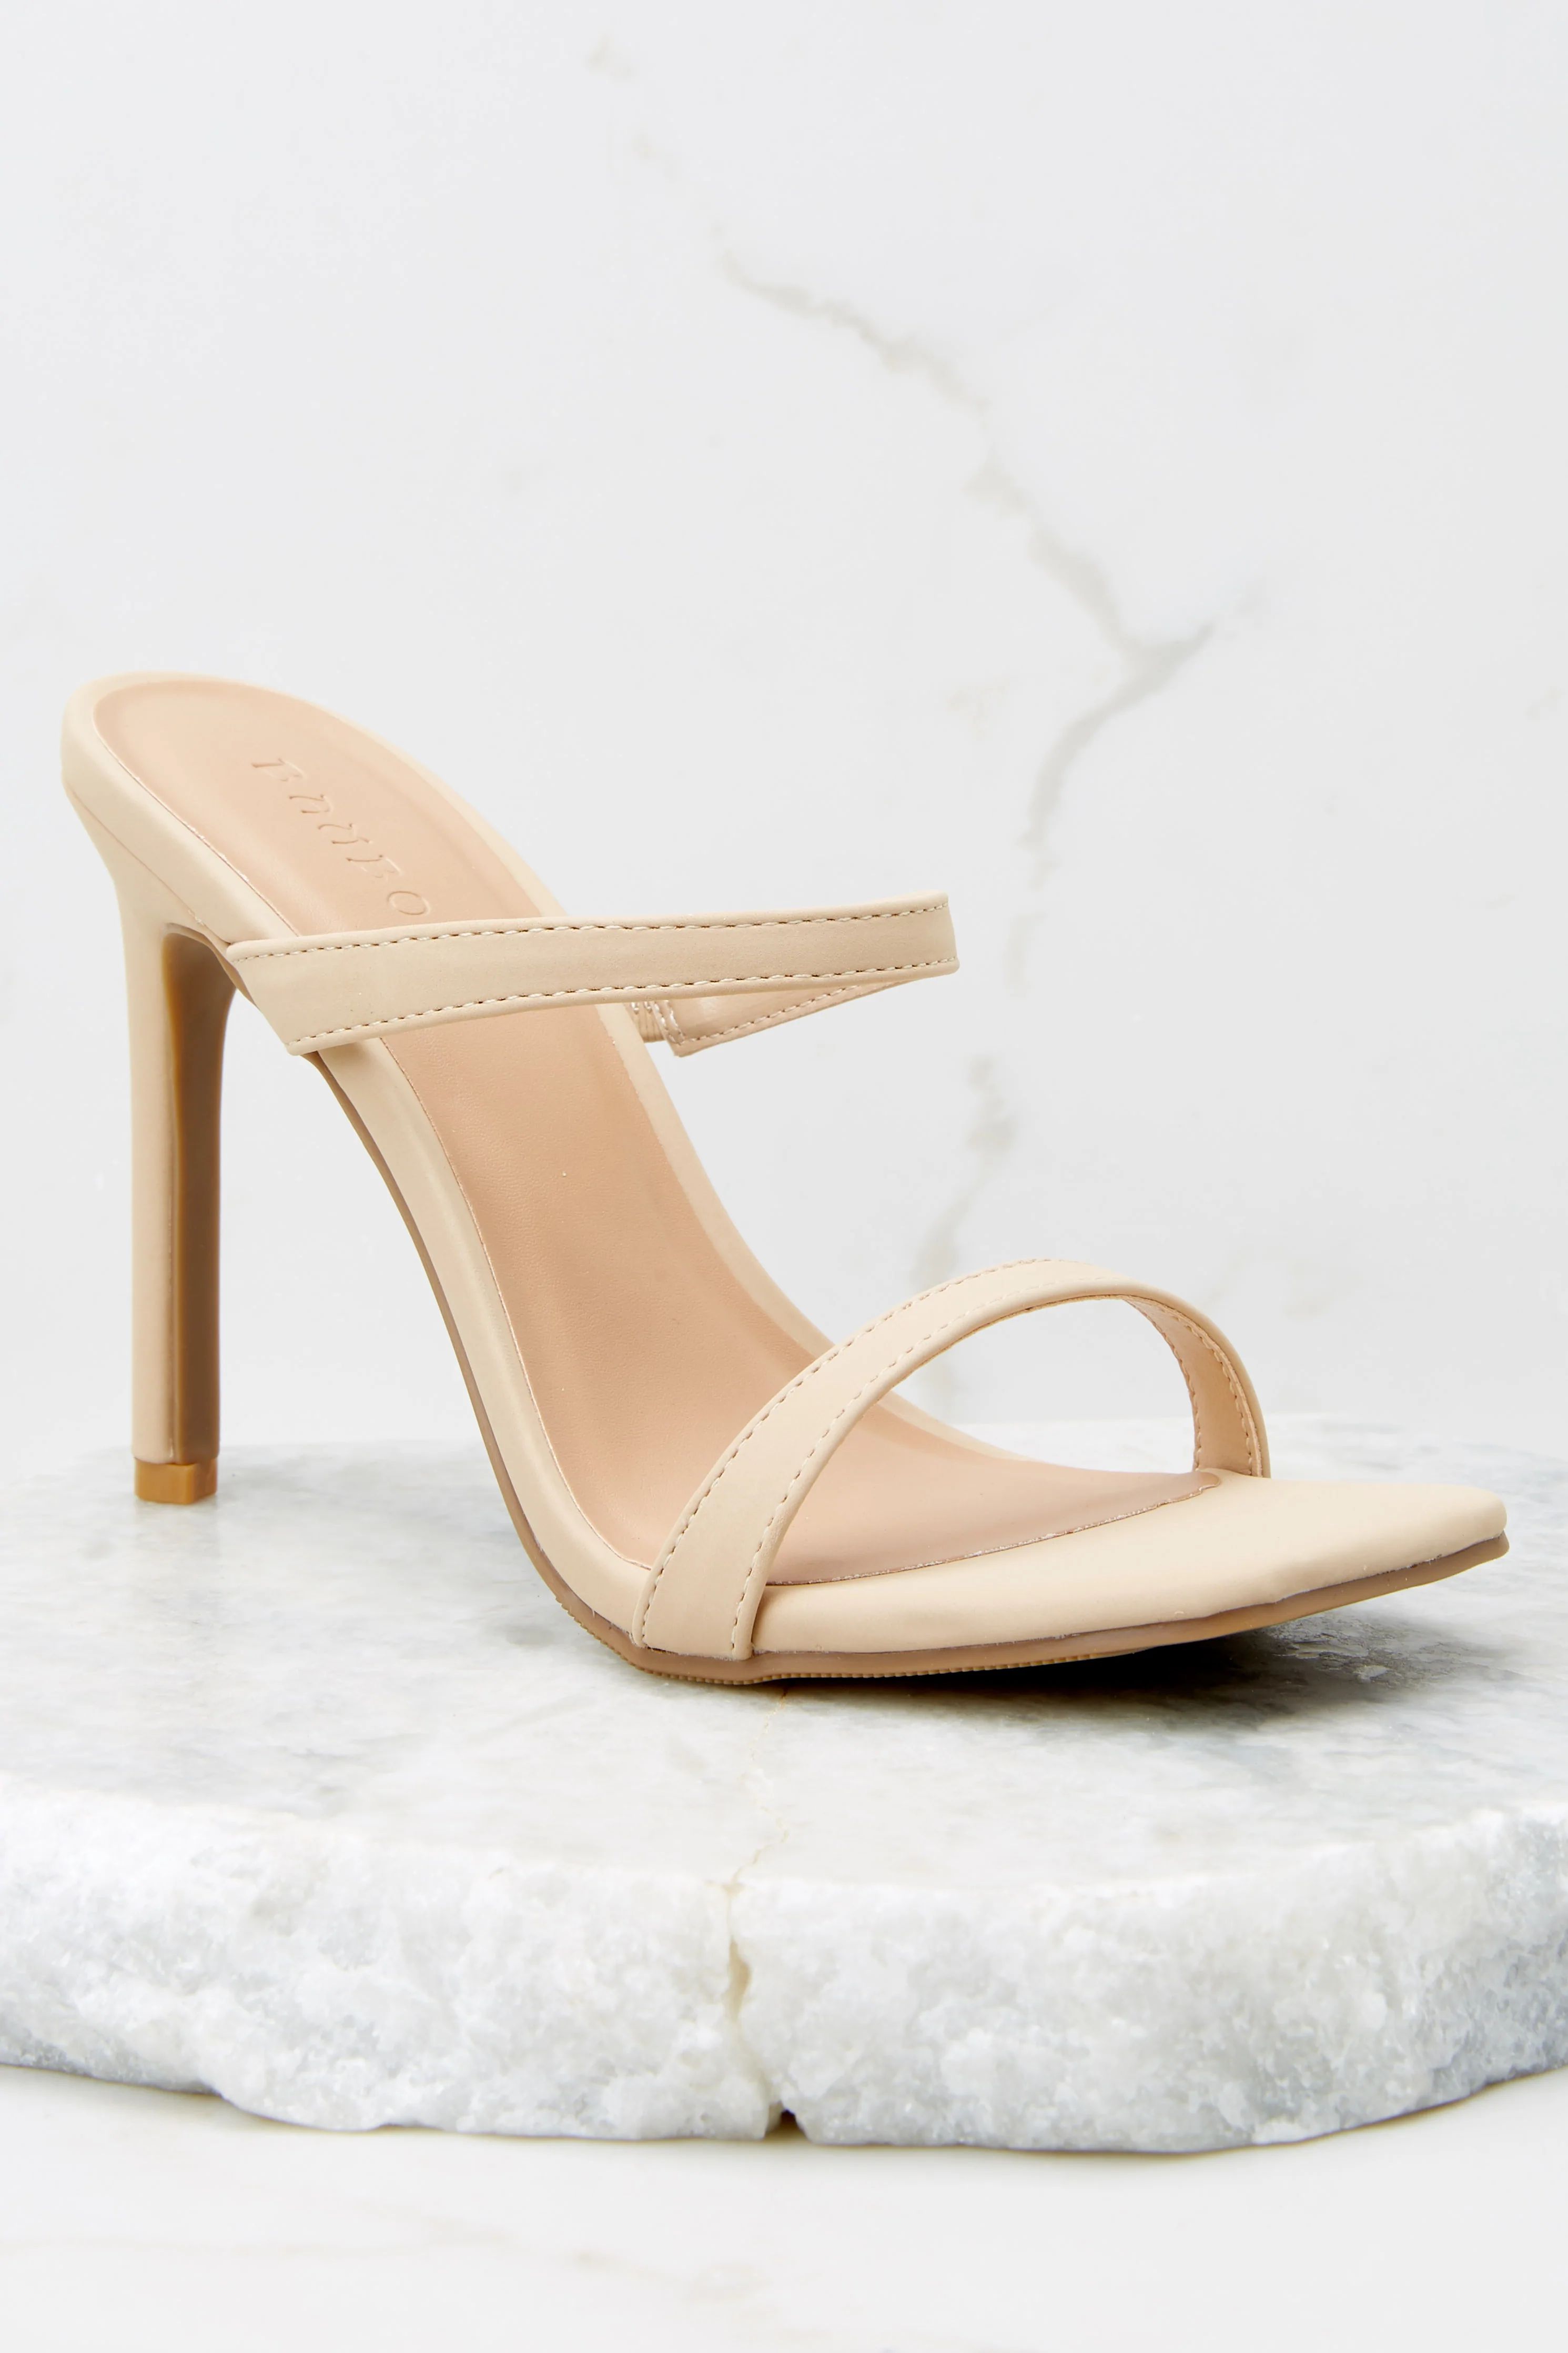 Always The Lead Nude High Heel Sandals | Red Dress 